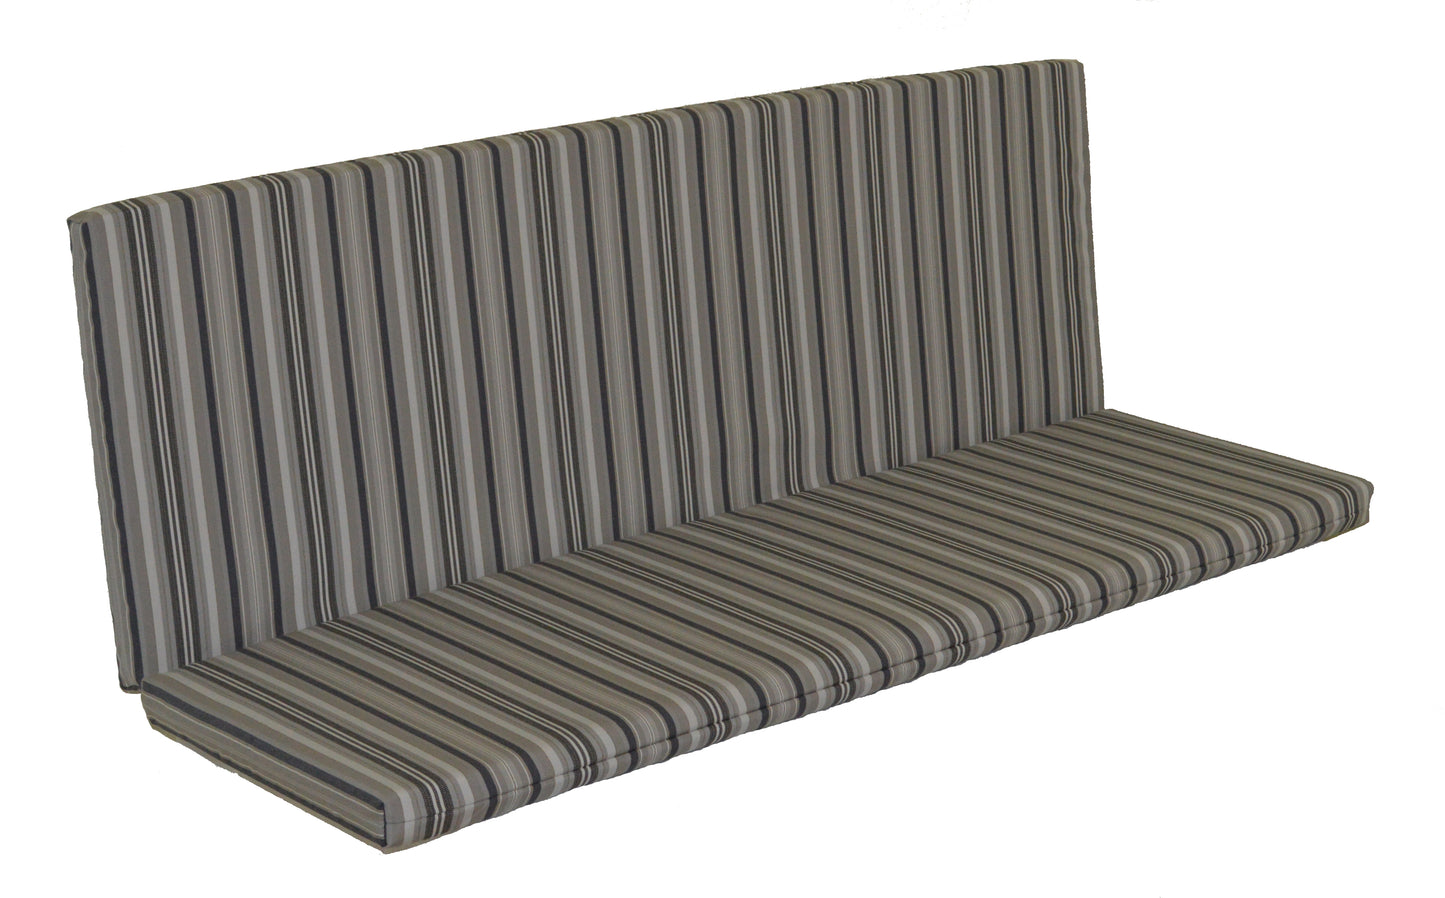 A&L Furniture Co. 6' Full Bench Cushion - LEAD TIME TO SHIP 10 BUSINESS DAYS